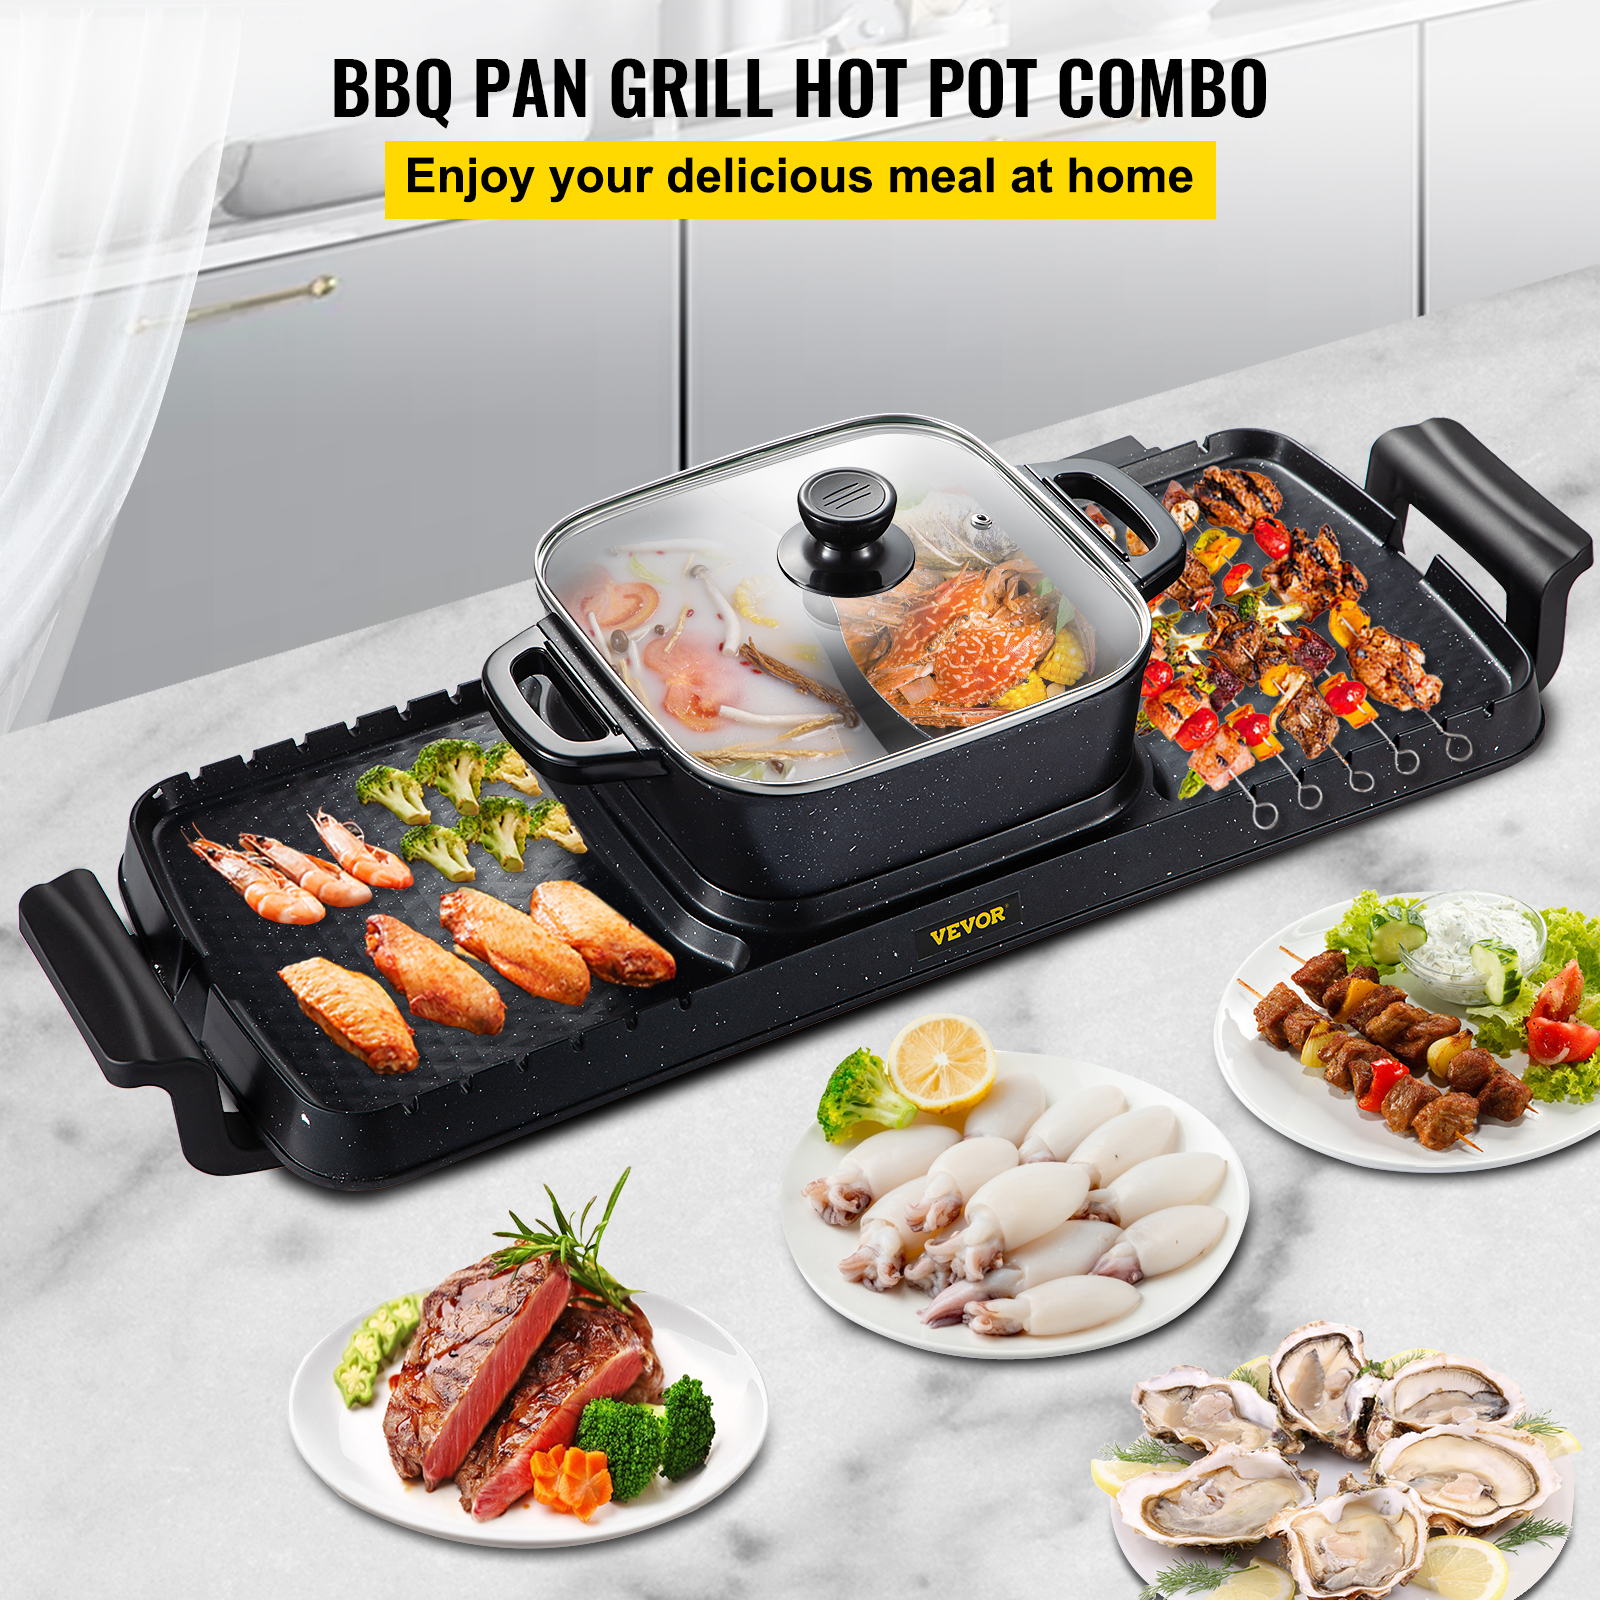 VEVORbrand 2 in 1 Electric Hot Pot and Grill,2400W Smokeless Hot Pot Grill,BBQ Hot Pot, Black - image 2 of 9